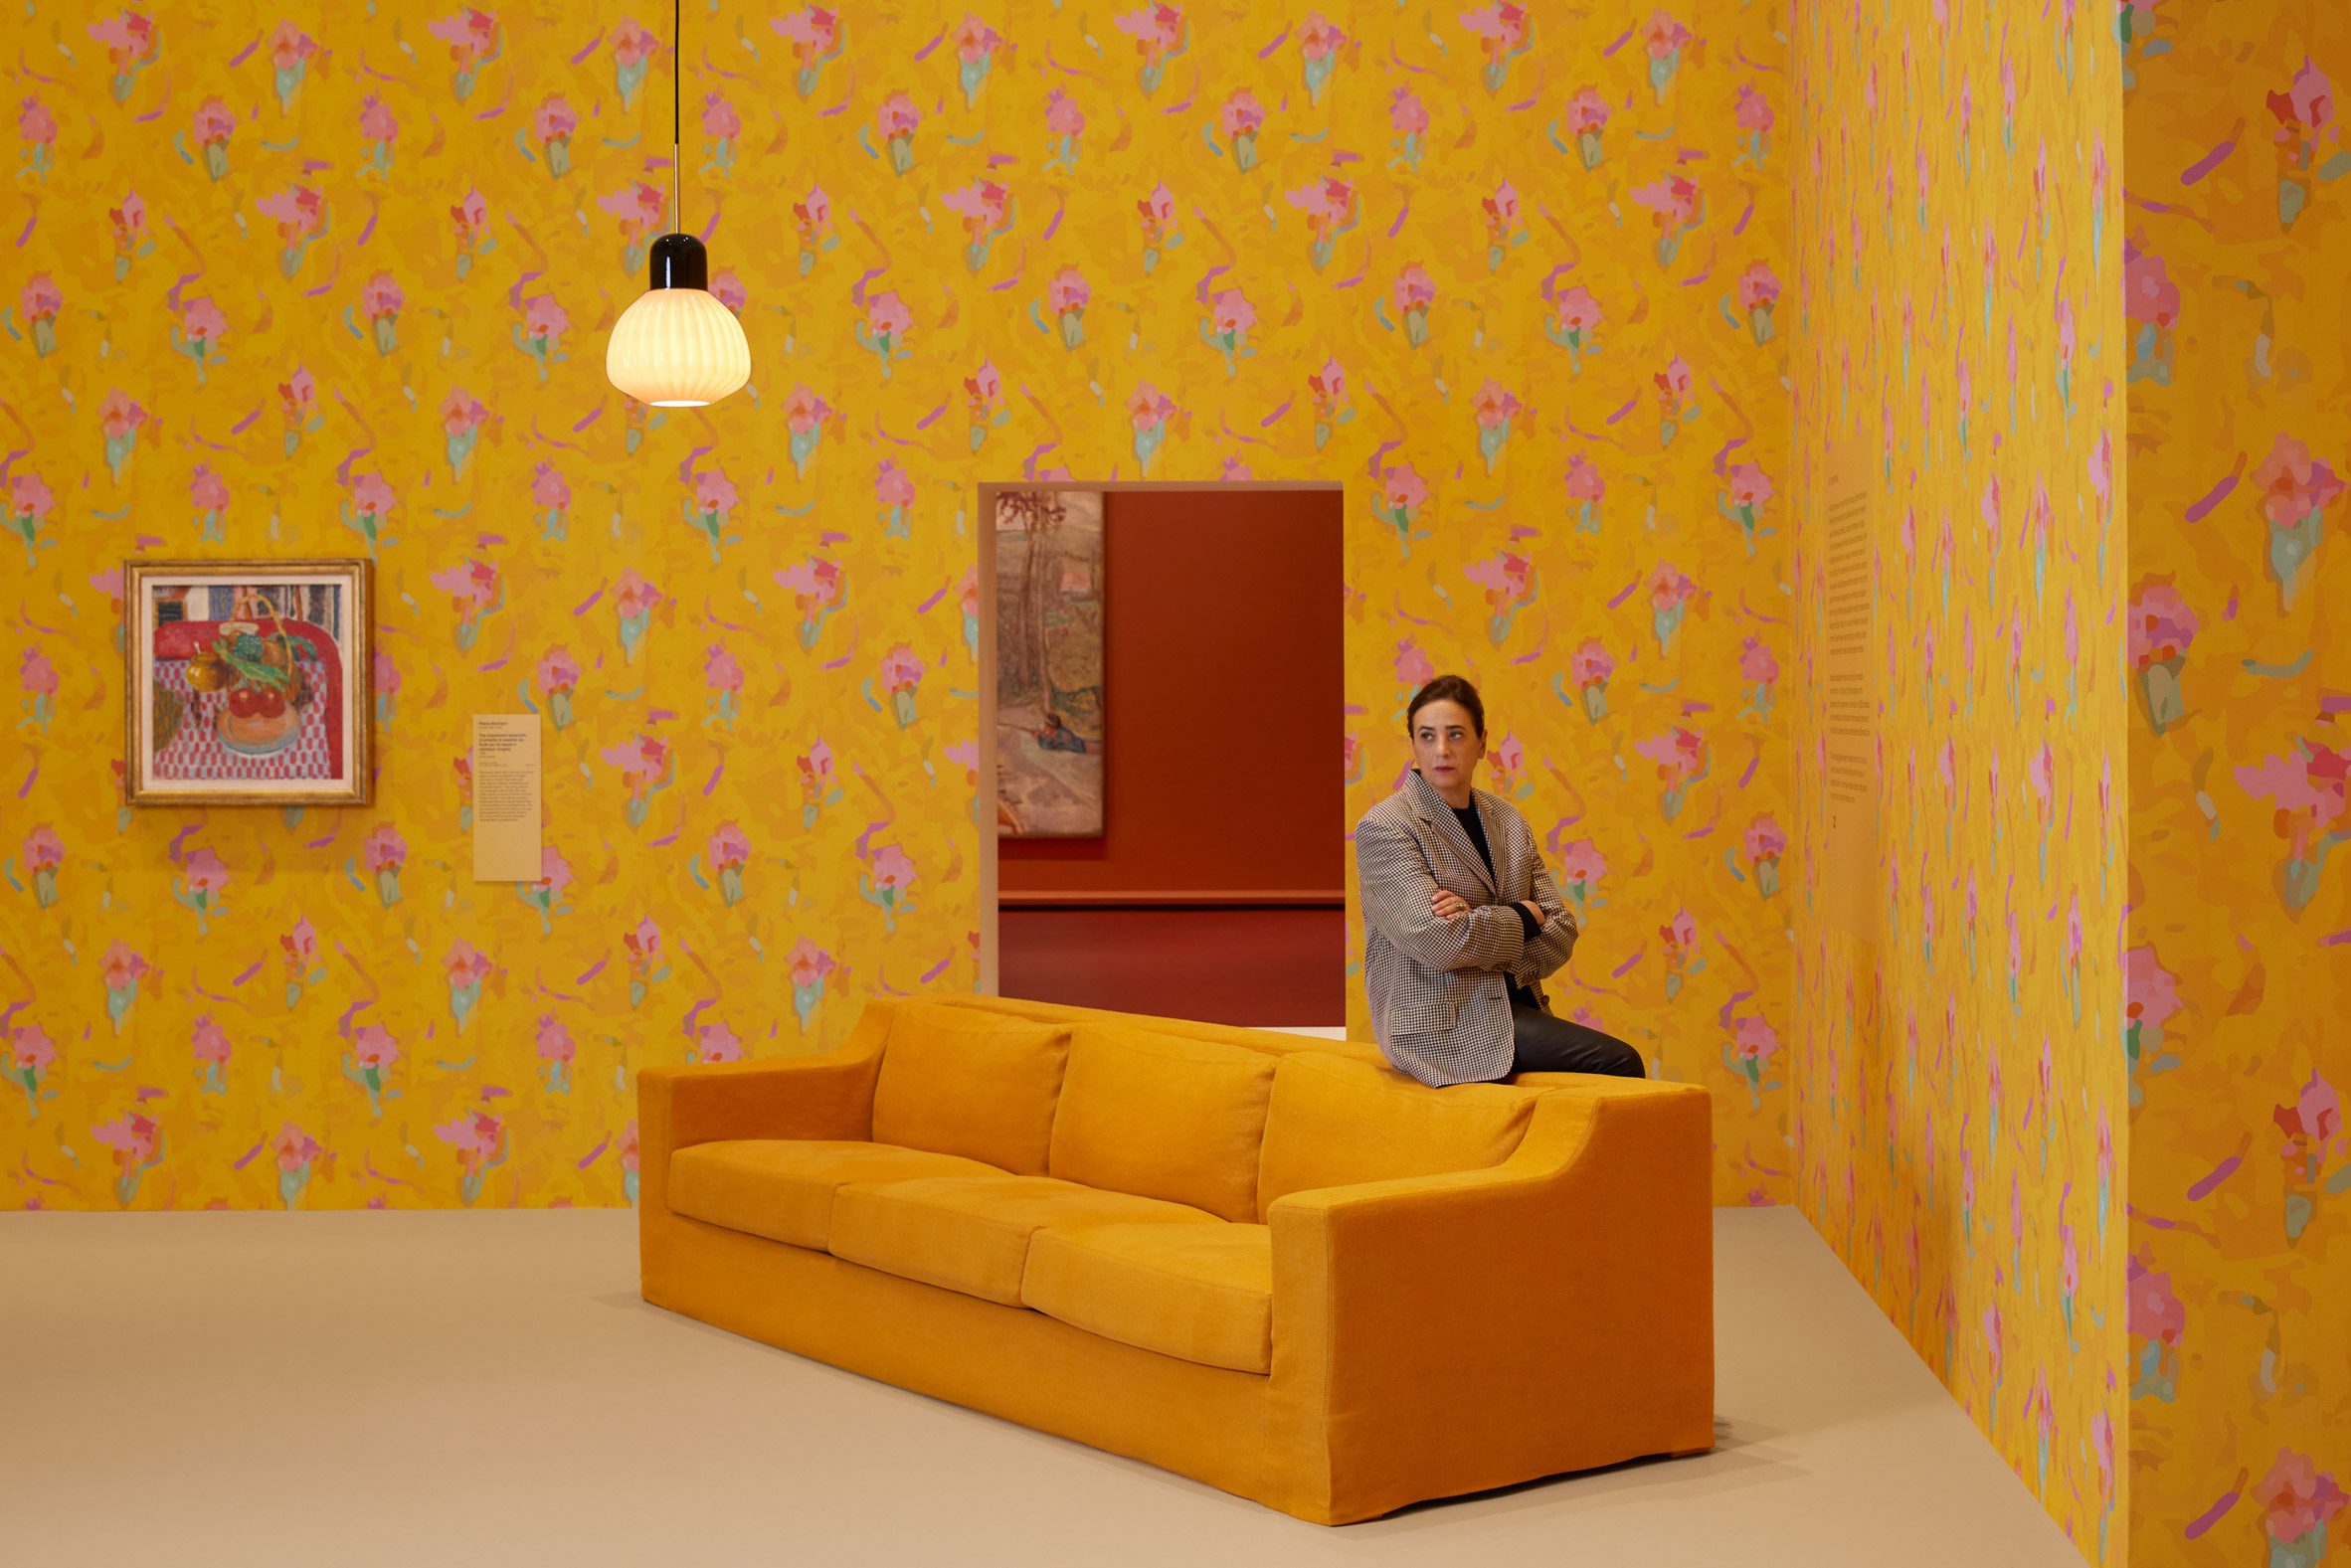 India Mahdavi leaning on a yellow sofa in a yellow gallery